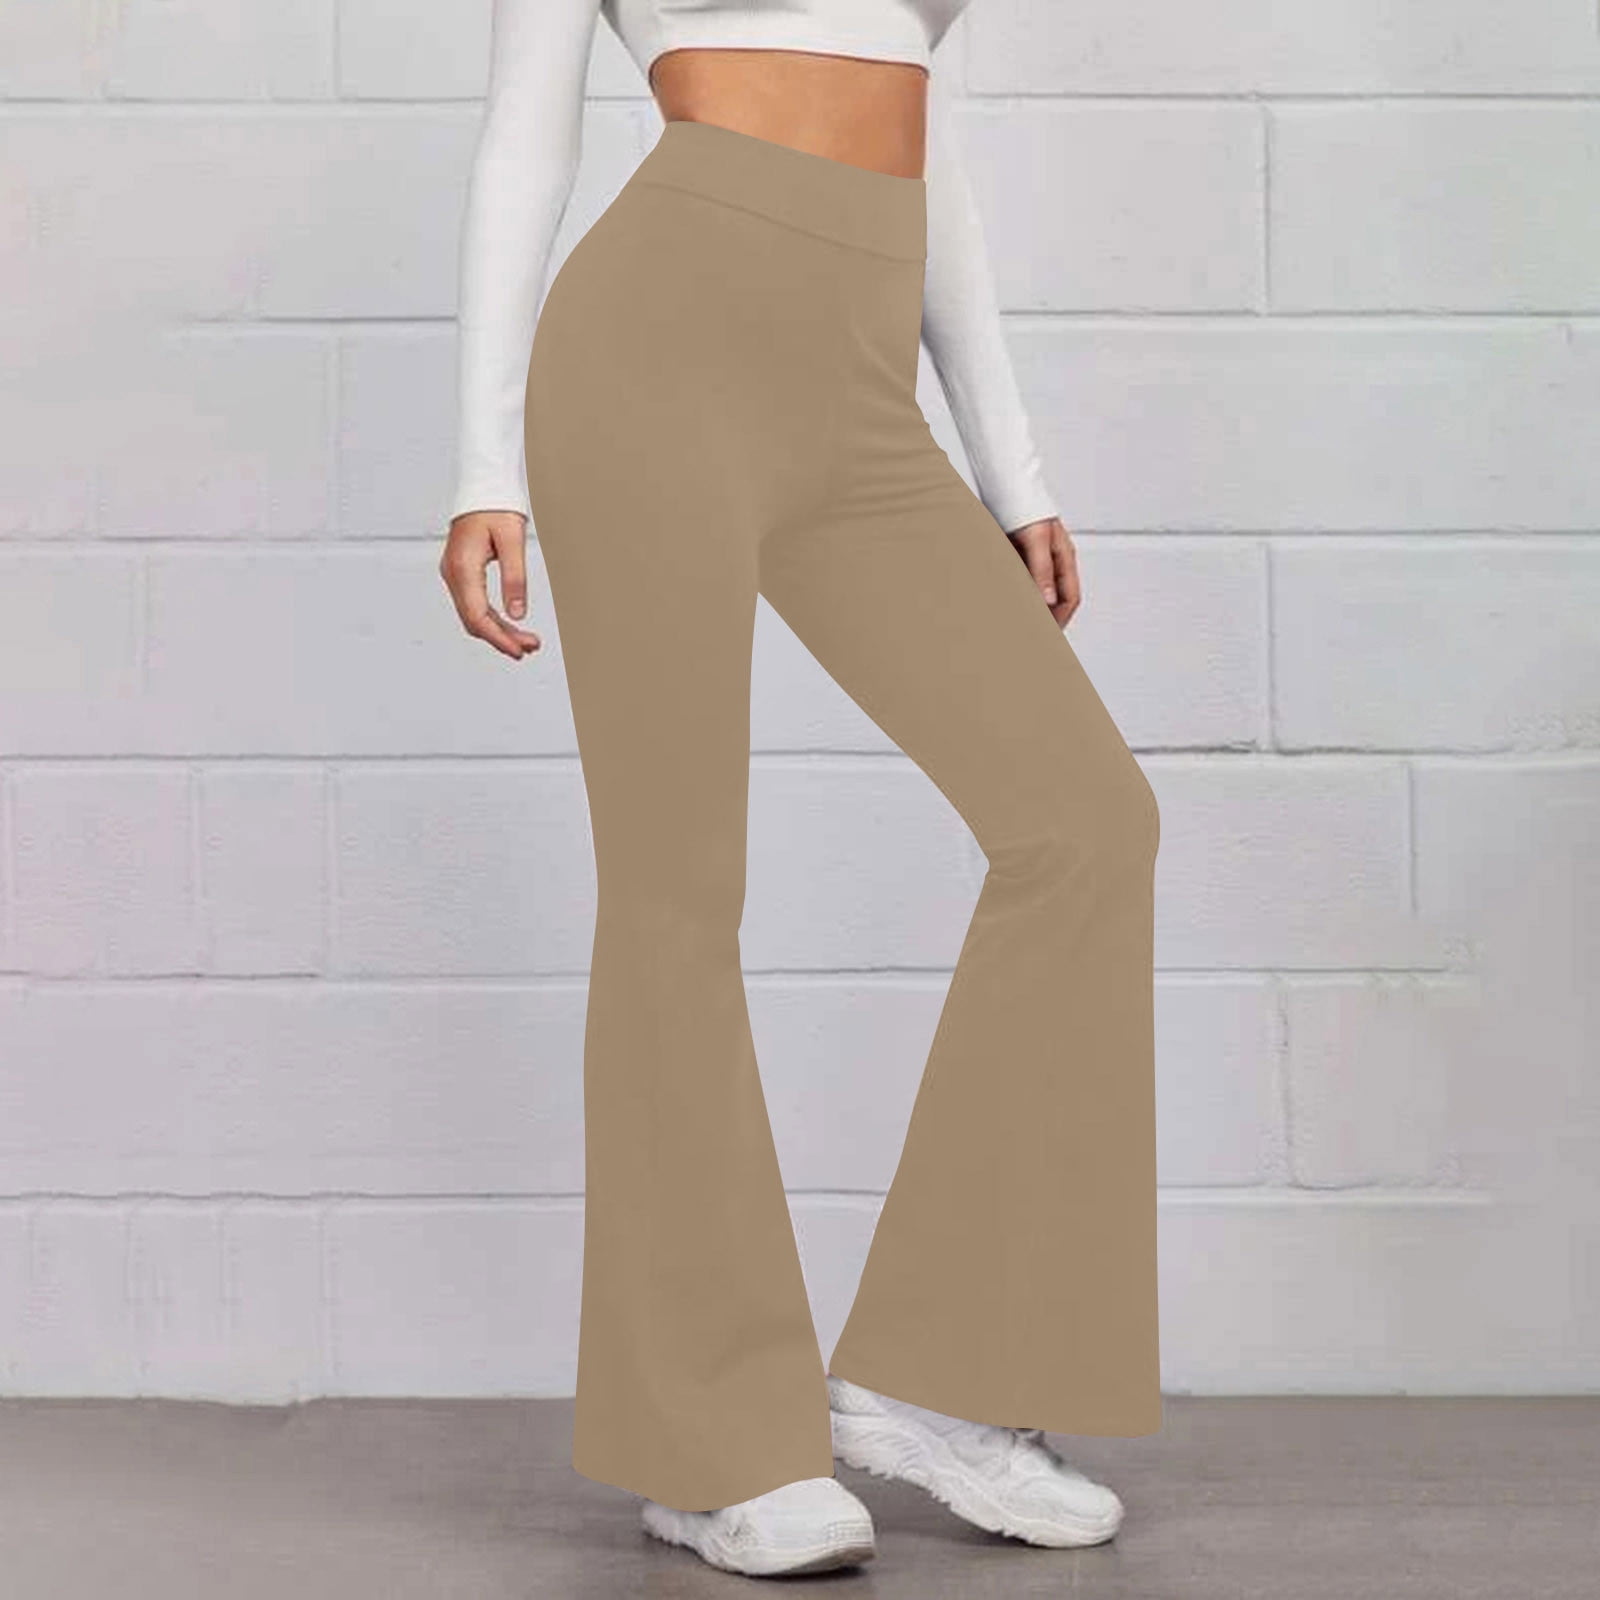 SELONE Sweatpants Women Baggy Flared Casual Slim Fit Long Pant Solid Suit  Pants Leisure Trousers Bell-bottoms Solid Color Pants for Everyday Wear